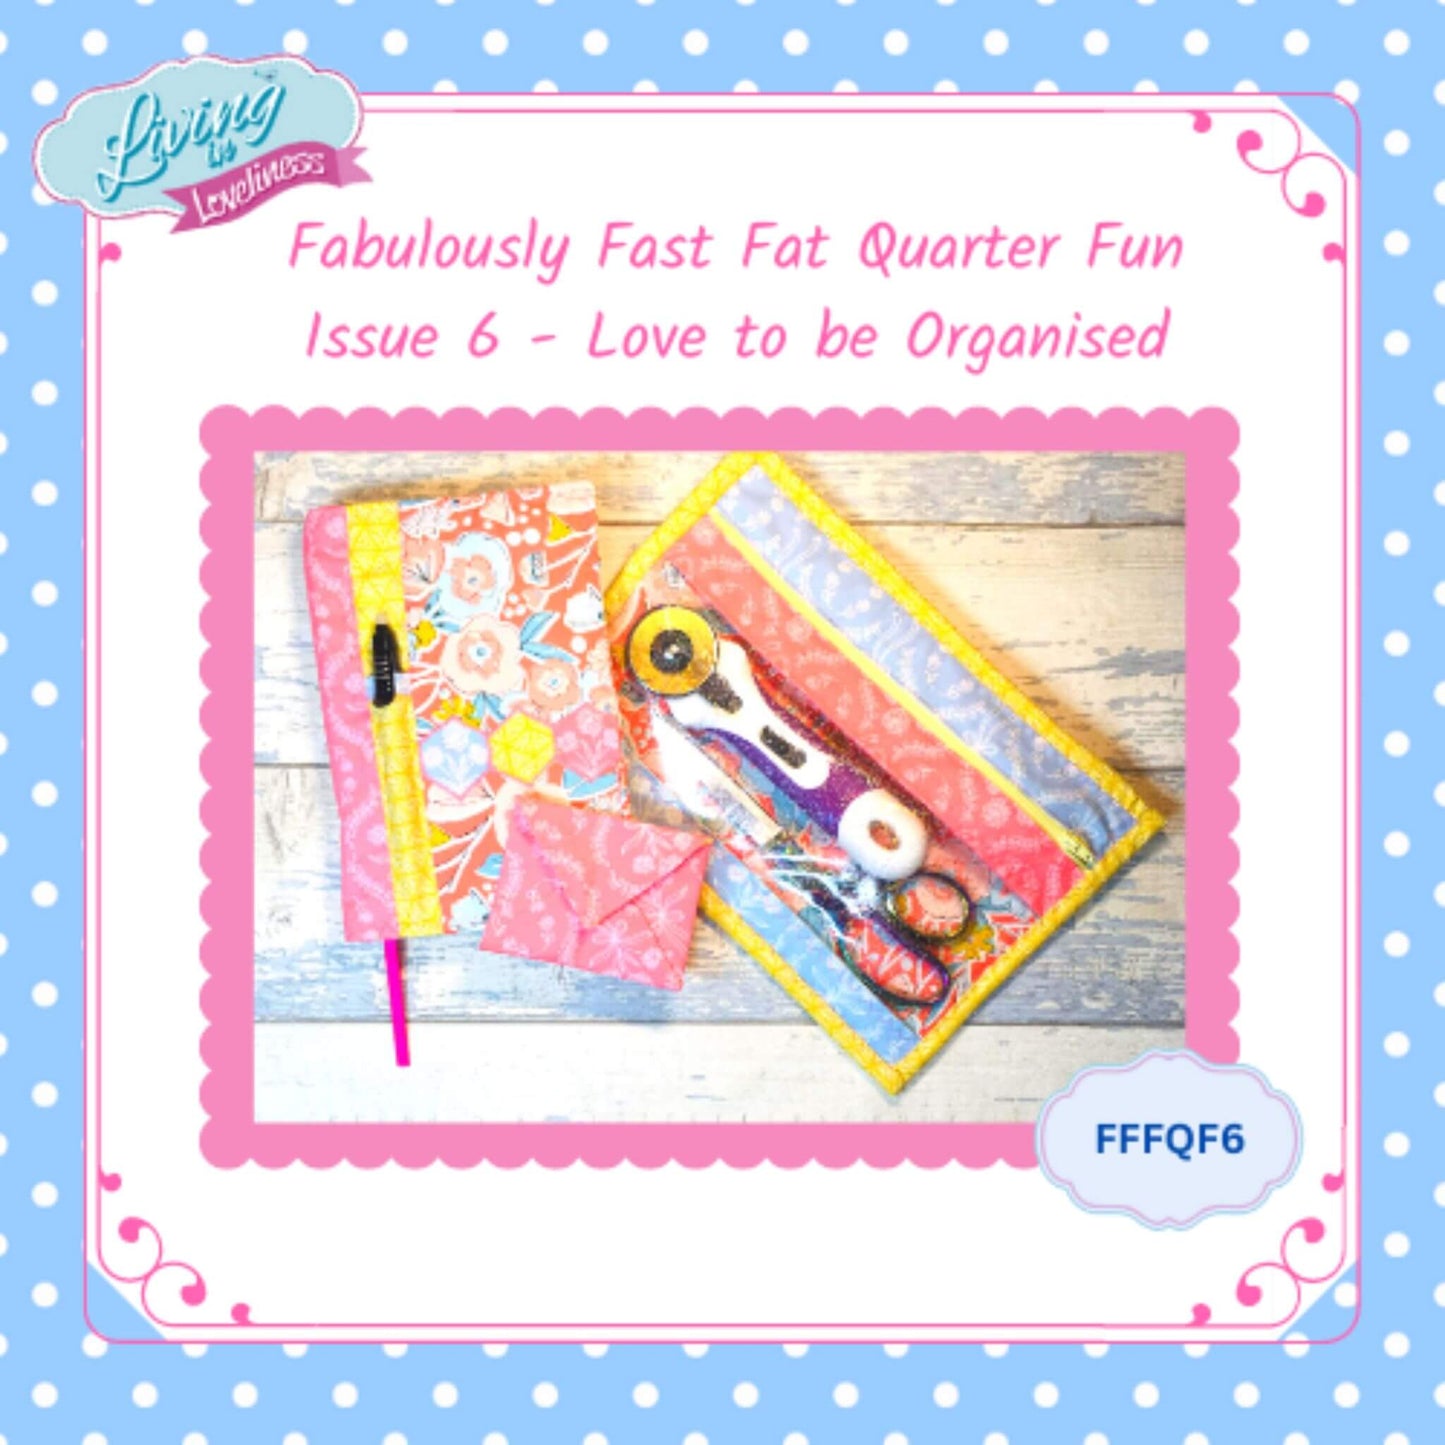 Issue 6 - Love to be Organised - The Fabulously Fast Fat Quarter Fun Series by Living in Loveliness